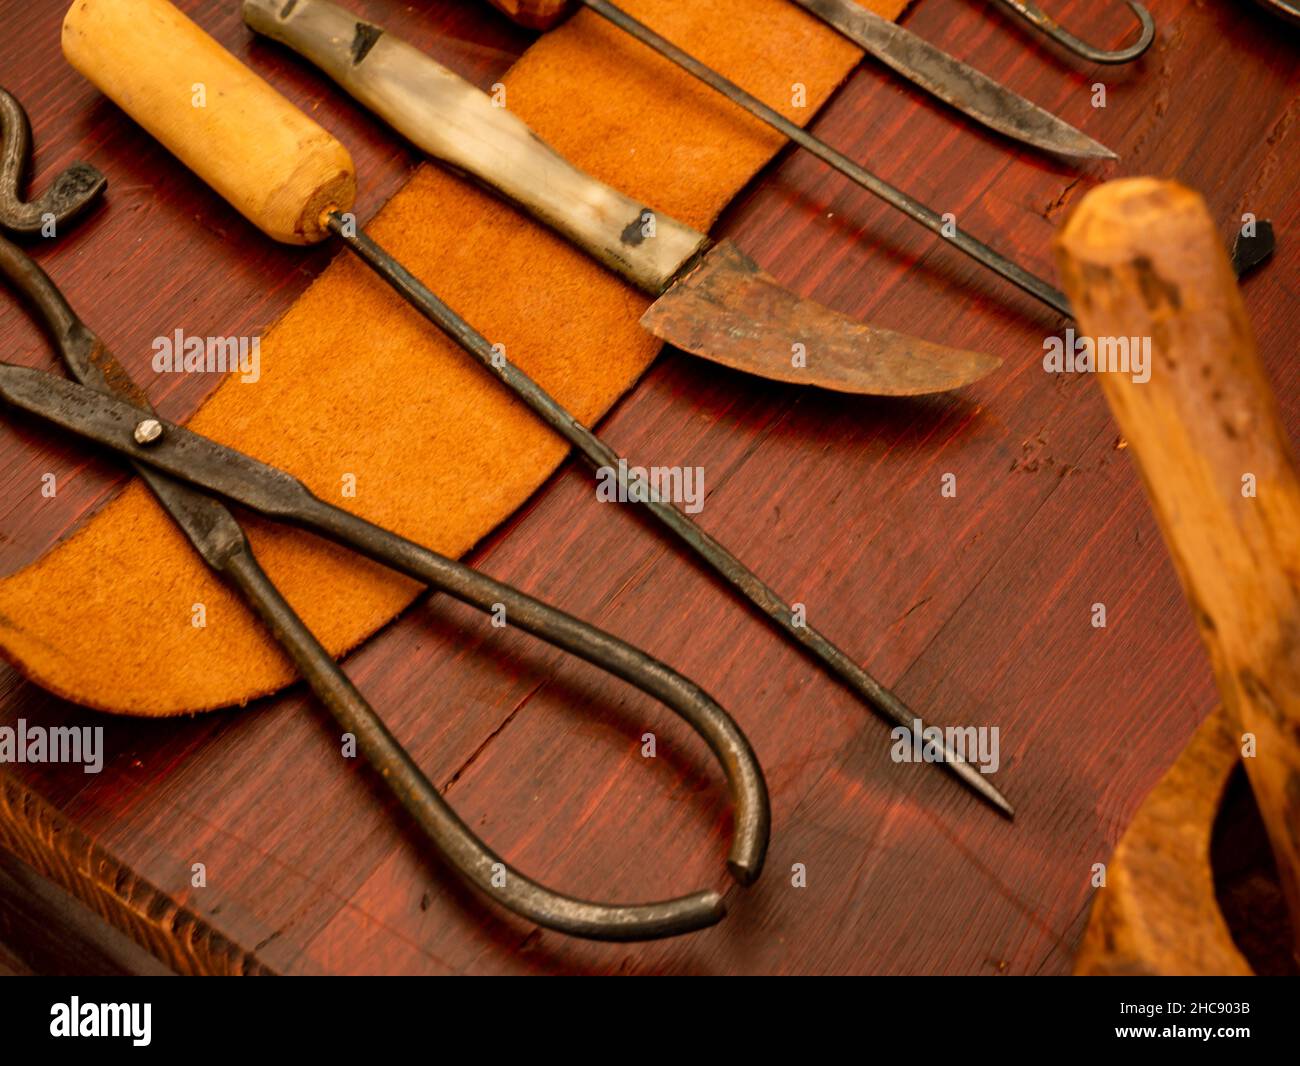 iron doctor or dentist tools reproductions medieval medical equipment Stock Photo